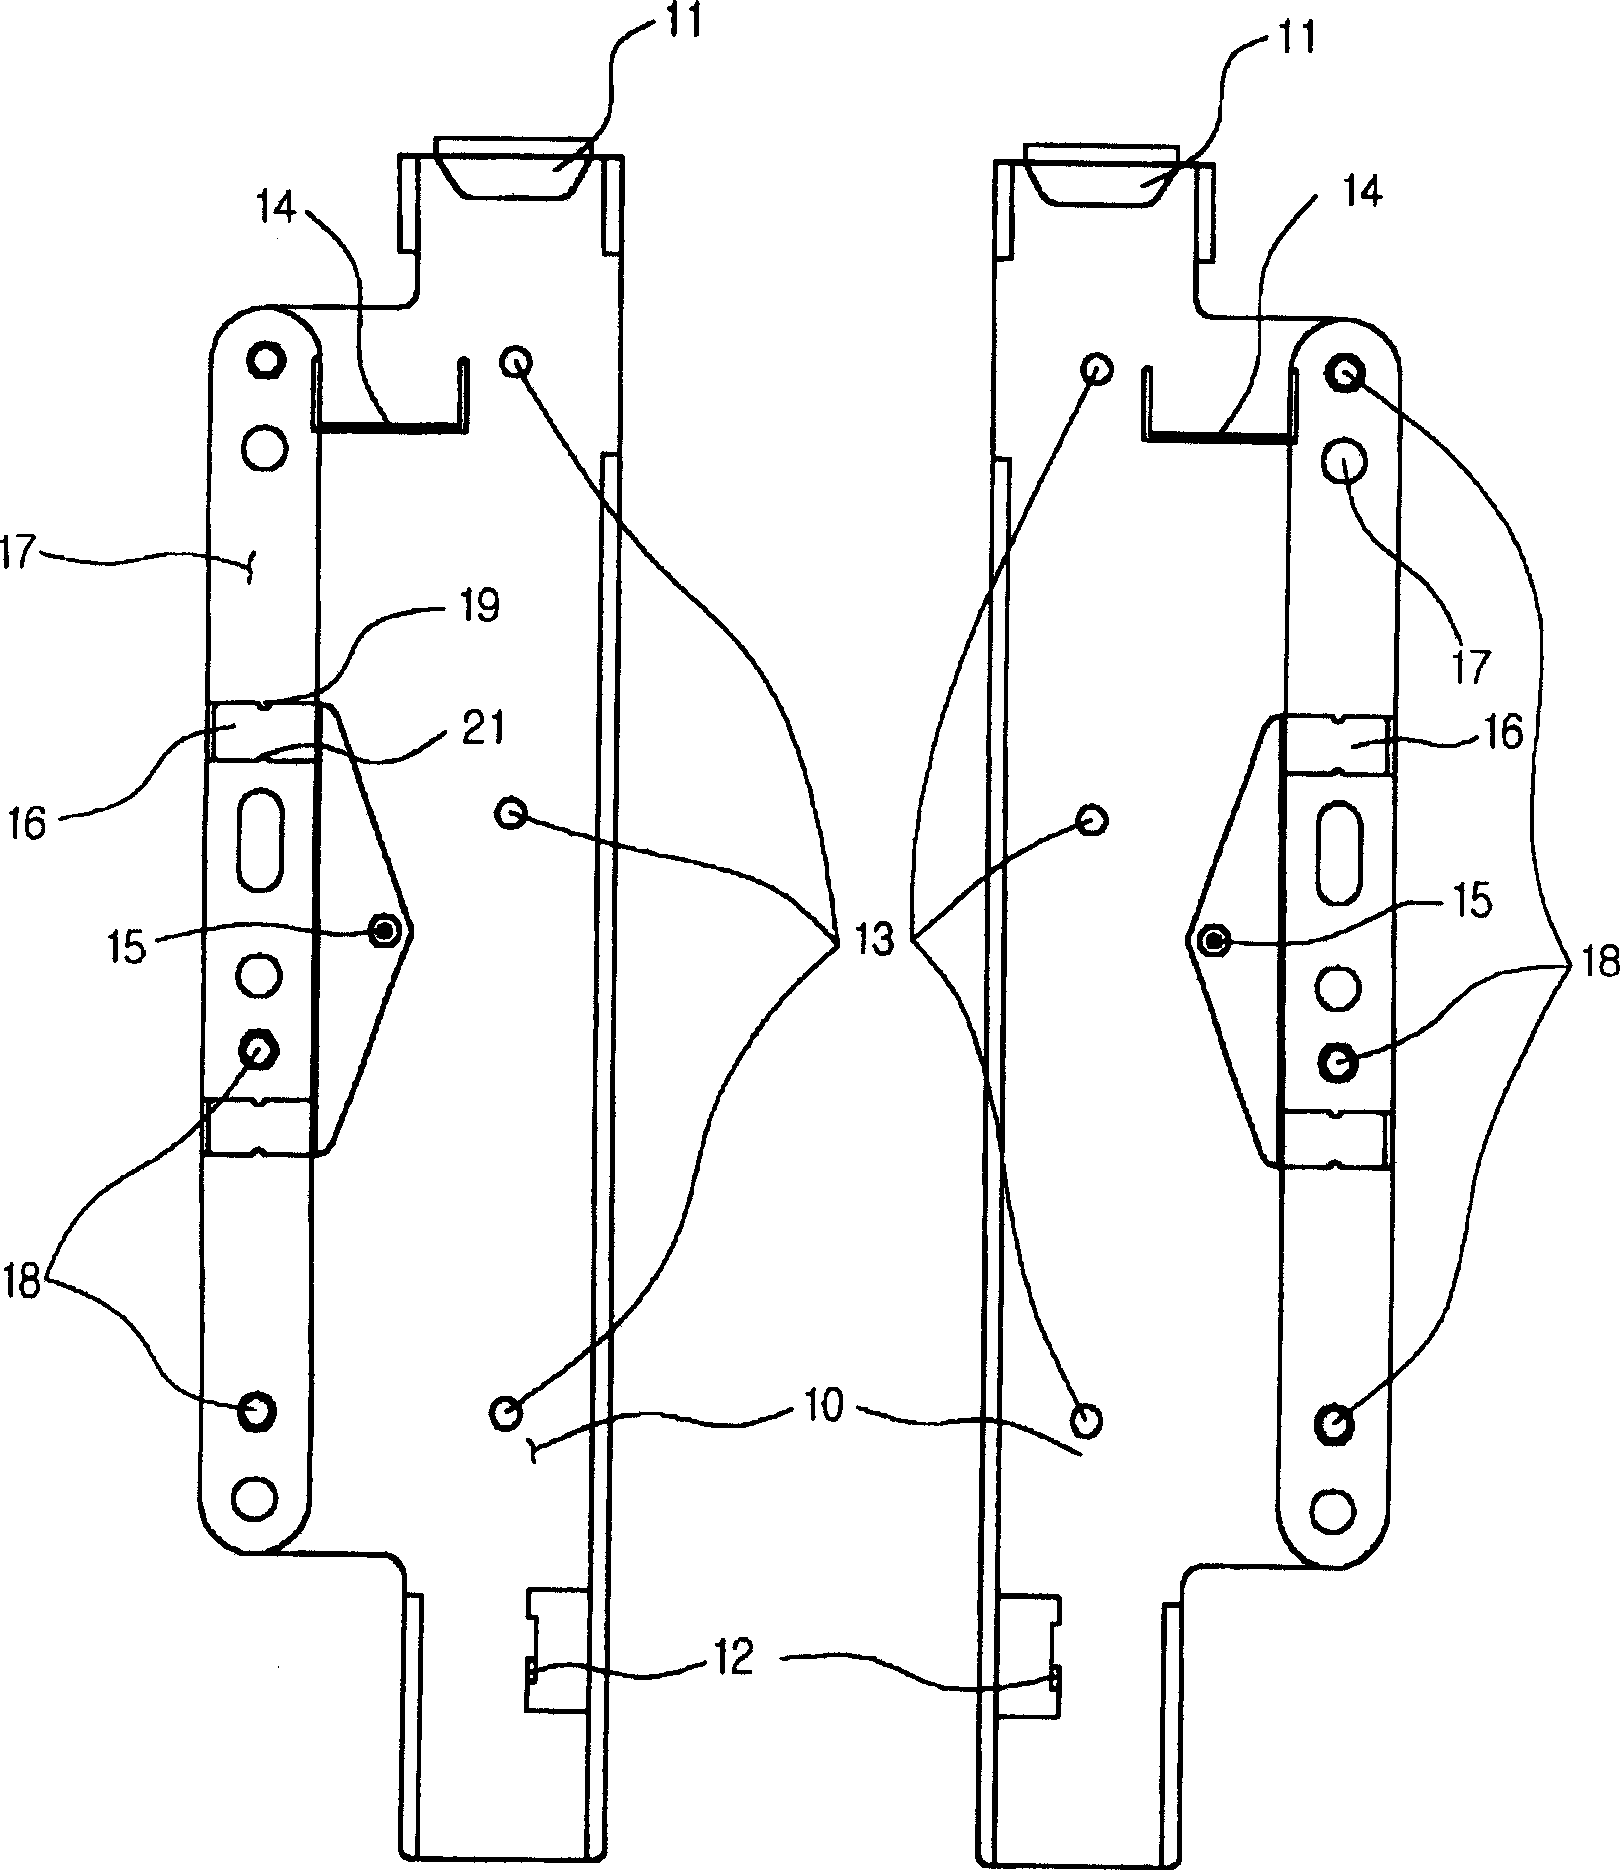 Wall hanging type equipment for image display appliance